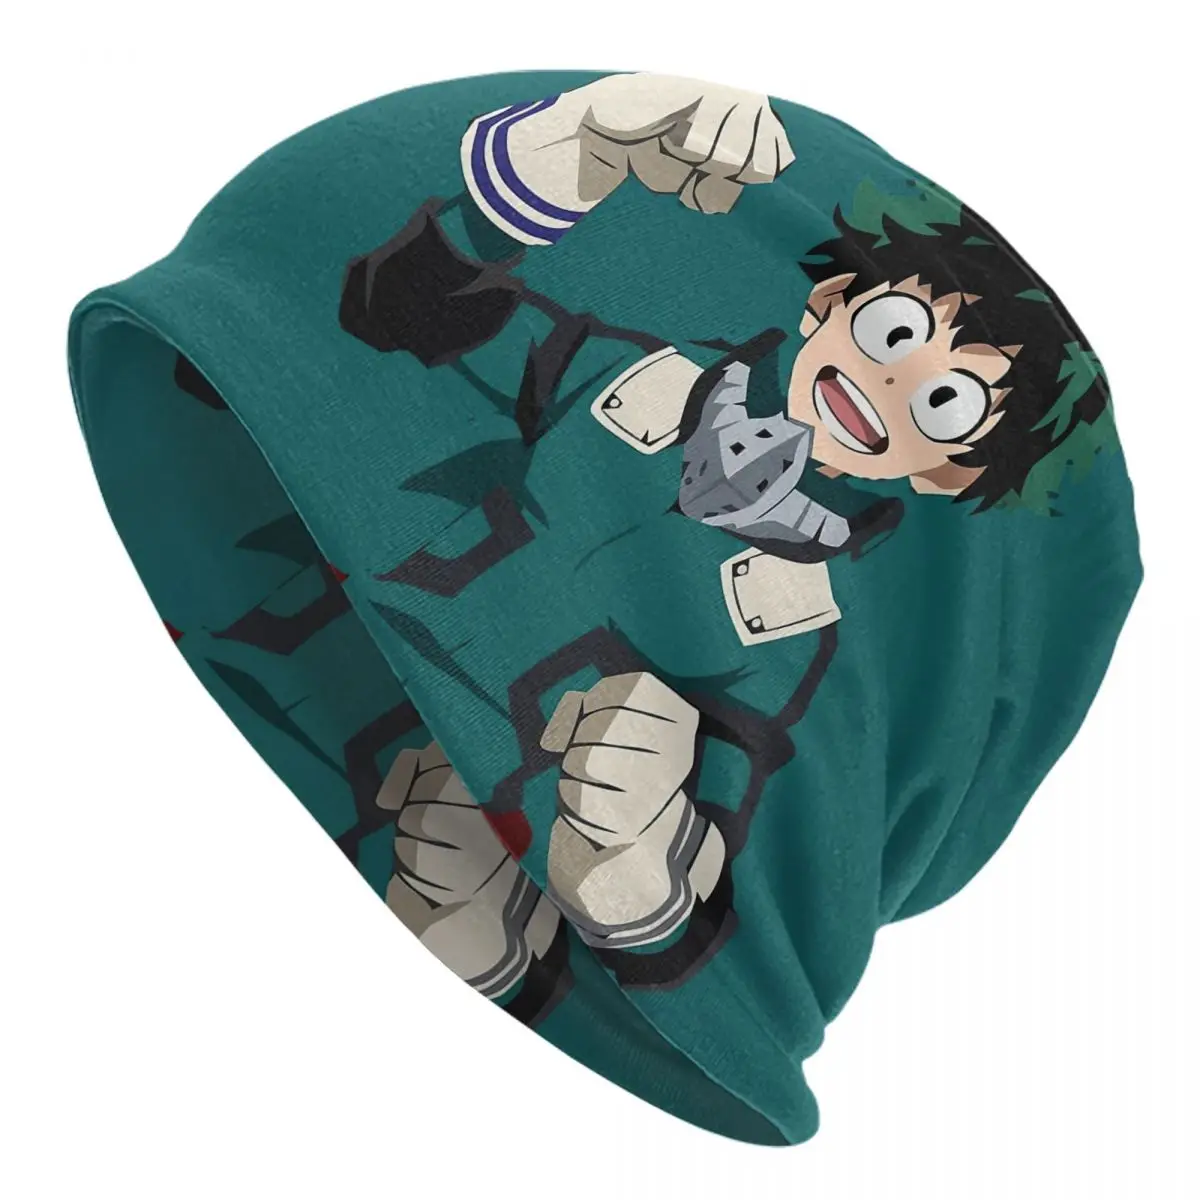 My Hero Academia Adult Men's Women's Knit Hat Keep warm winter Funny knitted hat